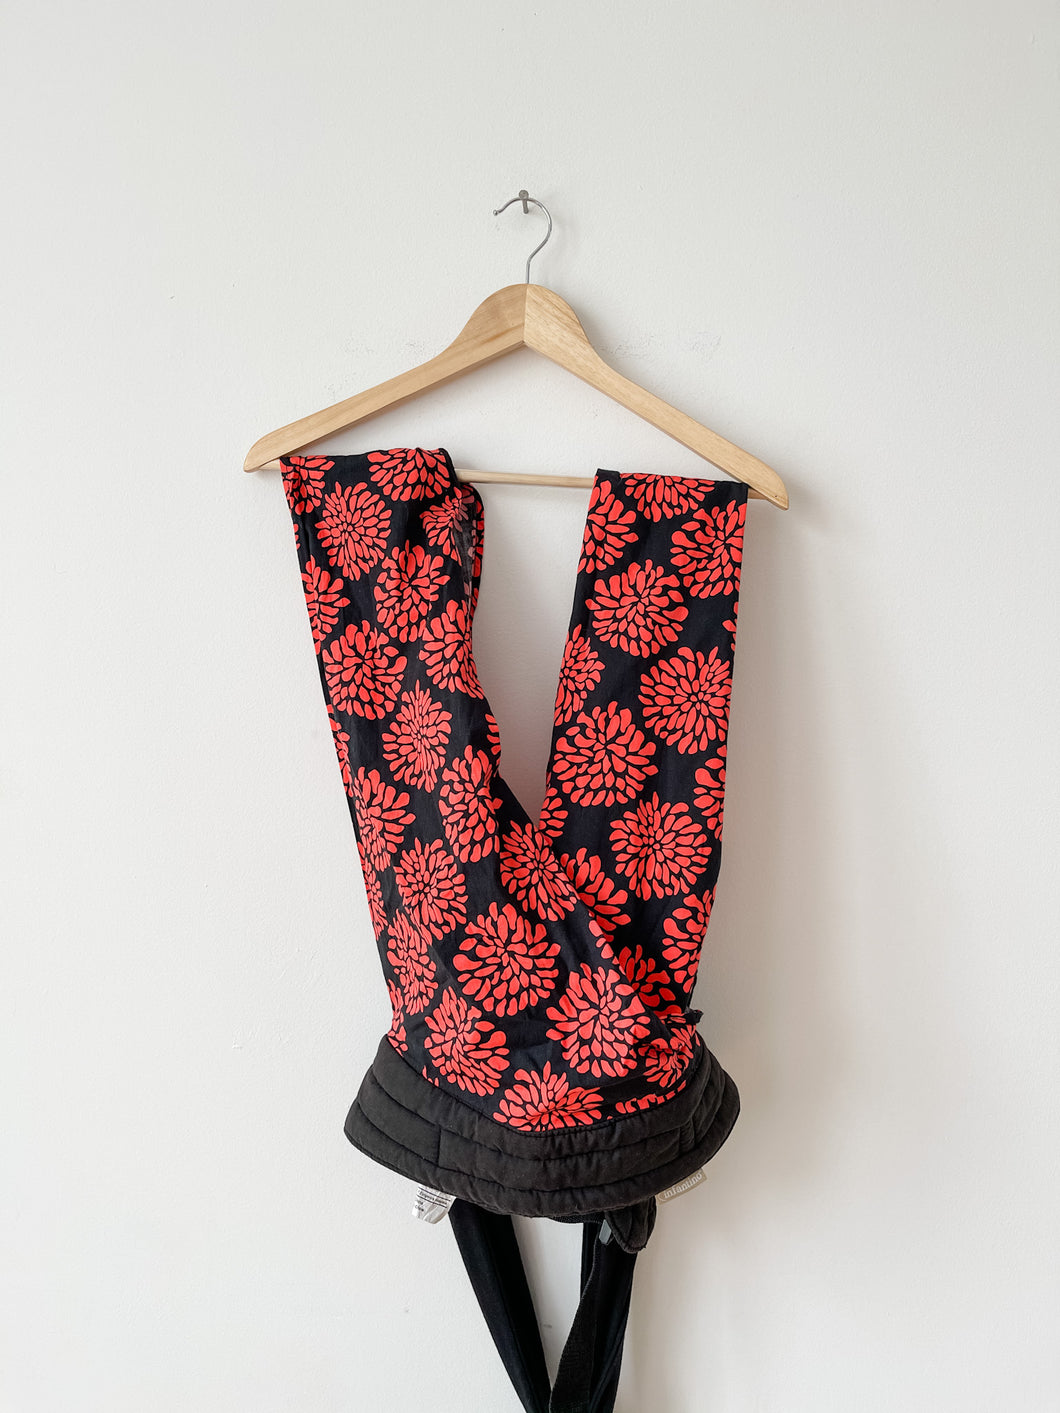 Black and Red Infantino Soft Carrier